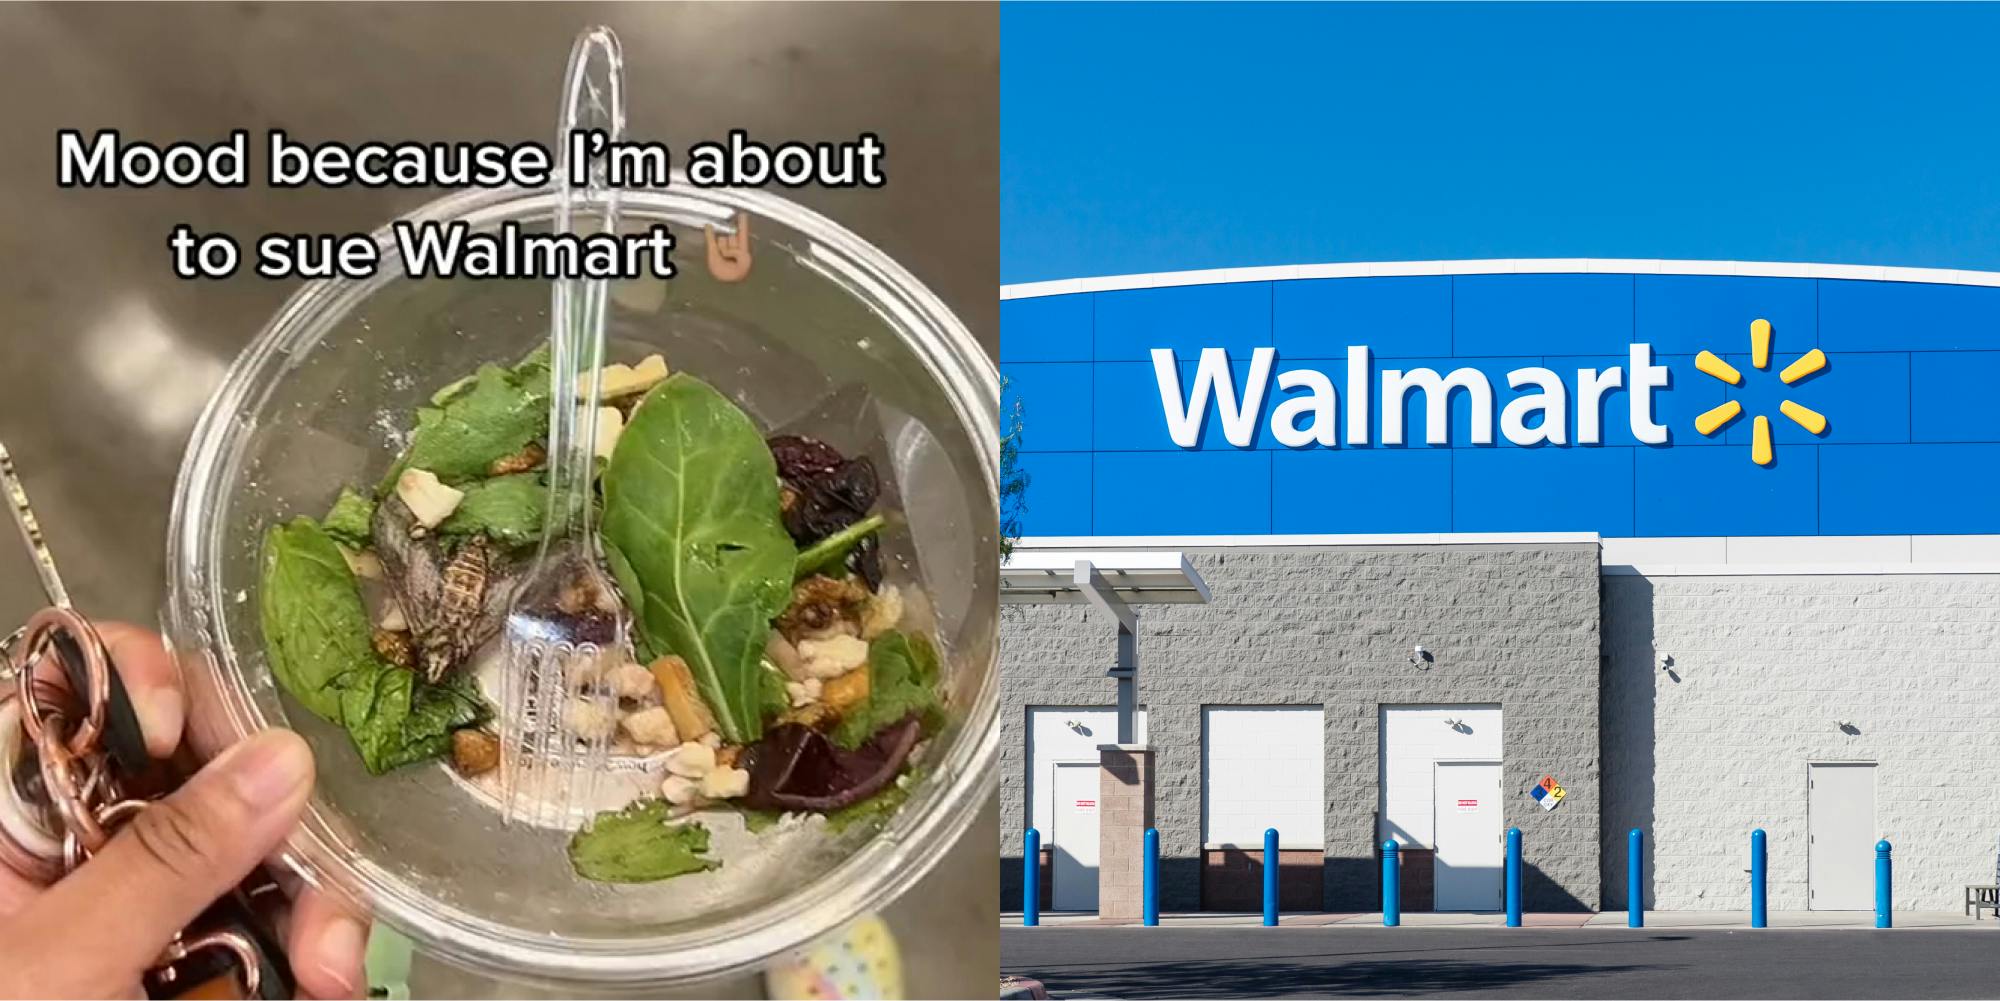 Walmart customer holding salad with moth with caption "Mood because I'm about to sue Walmart" (l) Walmart building with sign and blue sky (r)